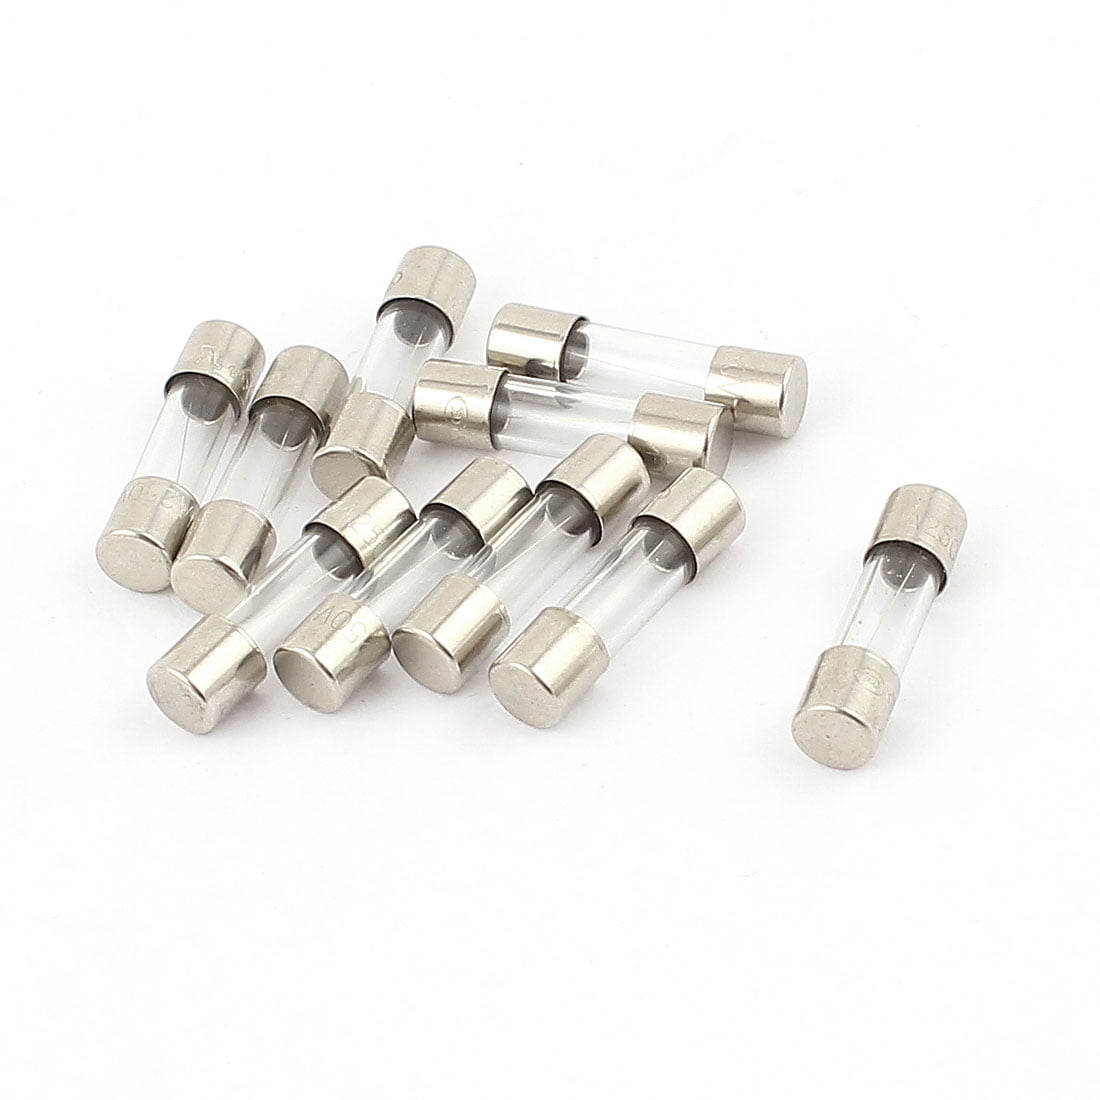 10 pieces 250V 1.25A 5x20mm Slow Blow Glass Tube Fuses 